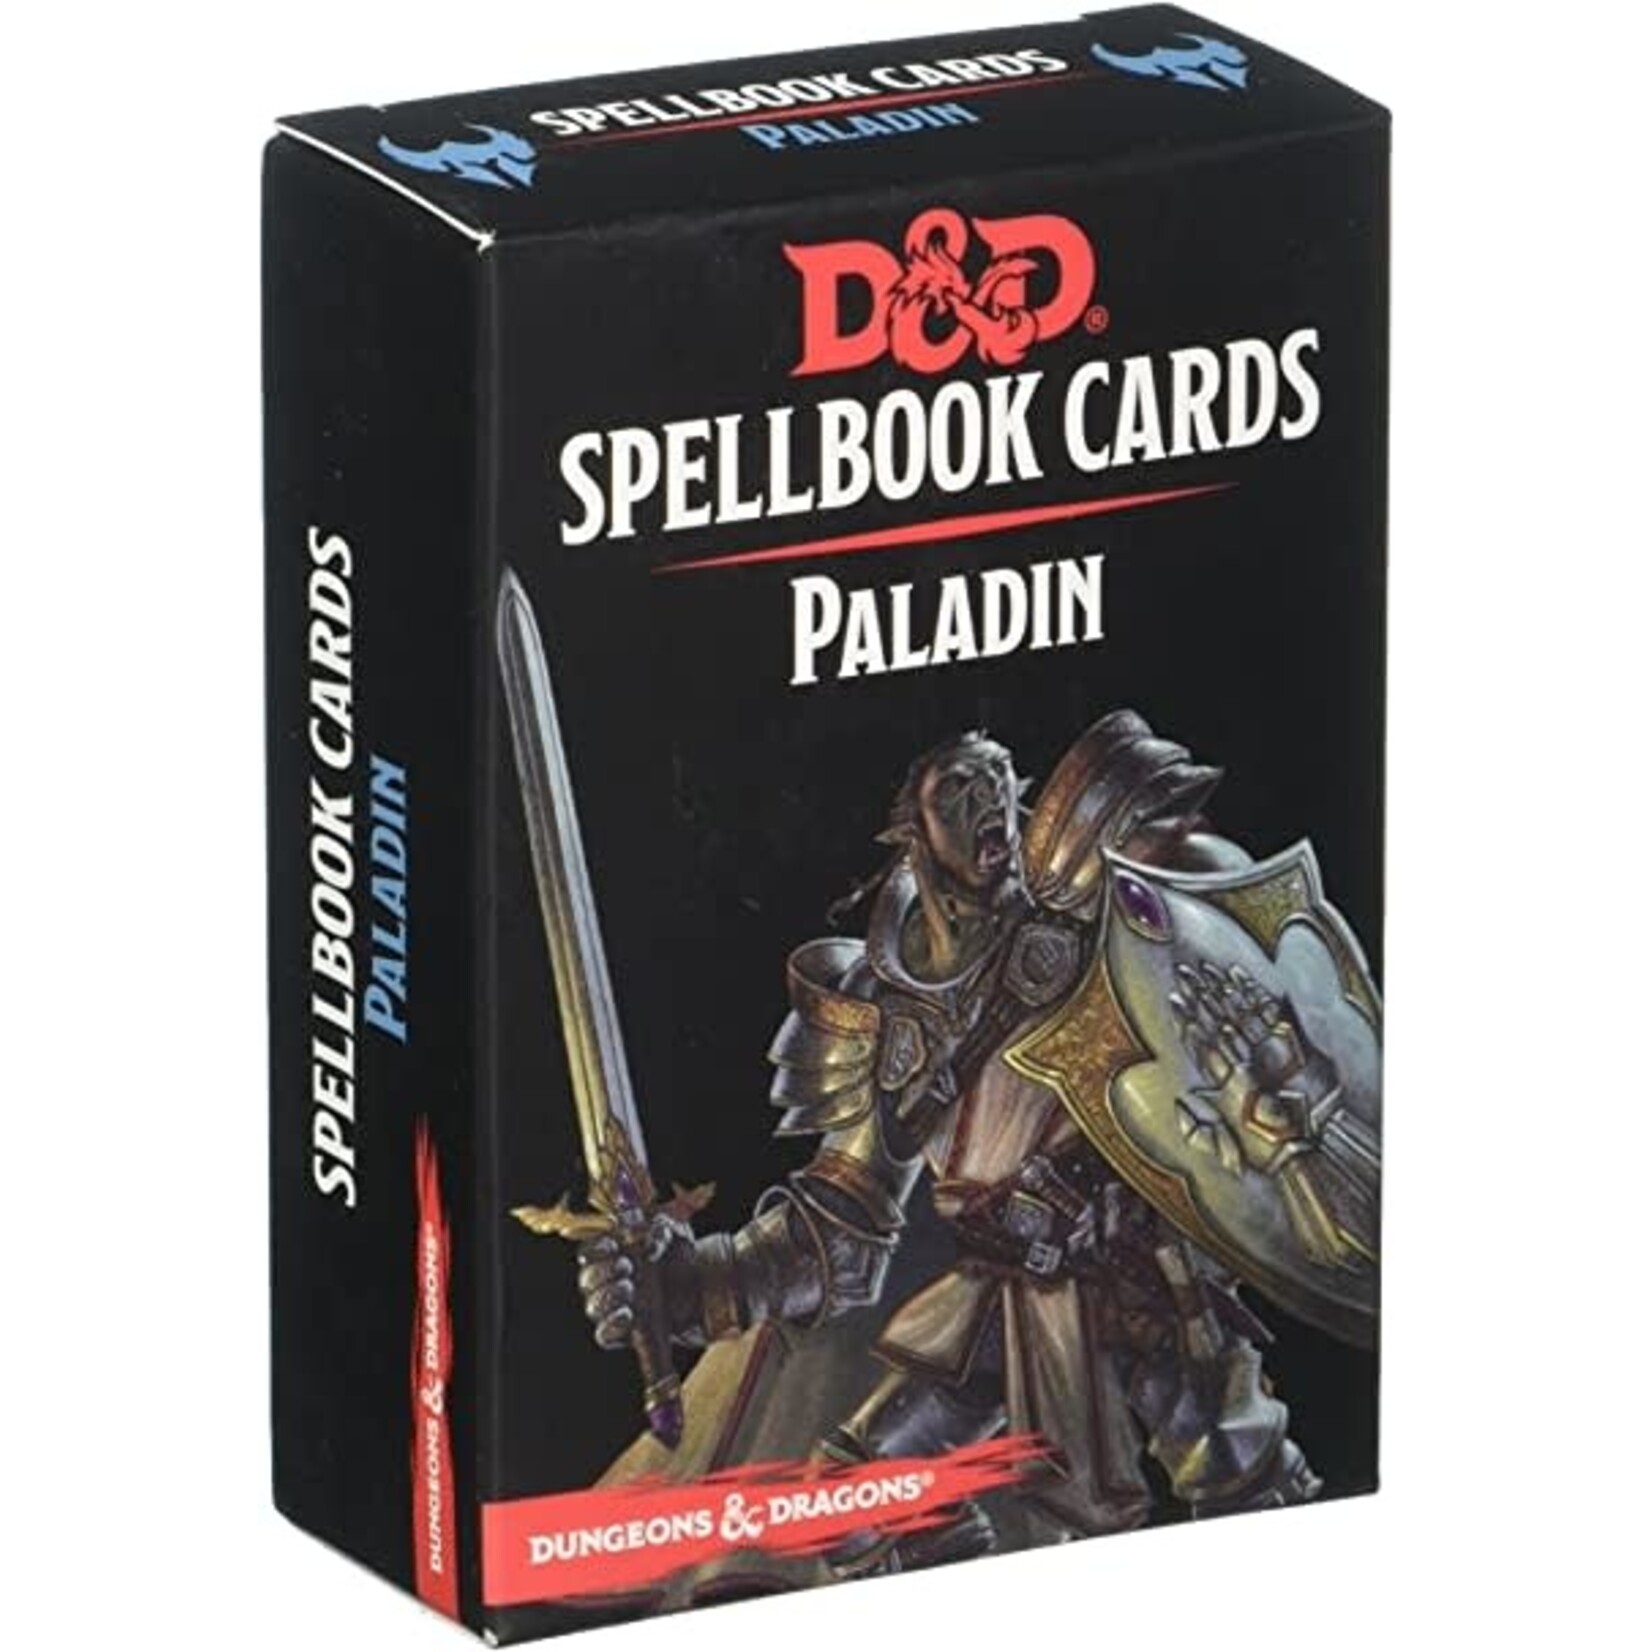 Wizards of the Coast DUNGEONS AND DRAGONS: UPDATED SPELLBOOK CARDS - PALADIN DECK